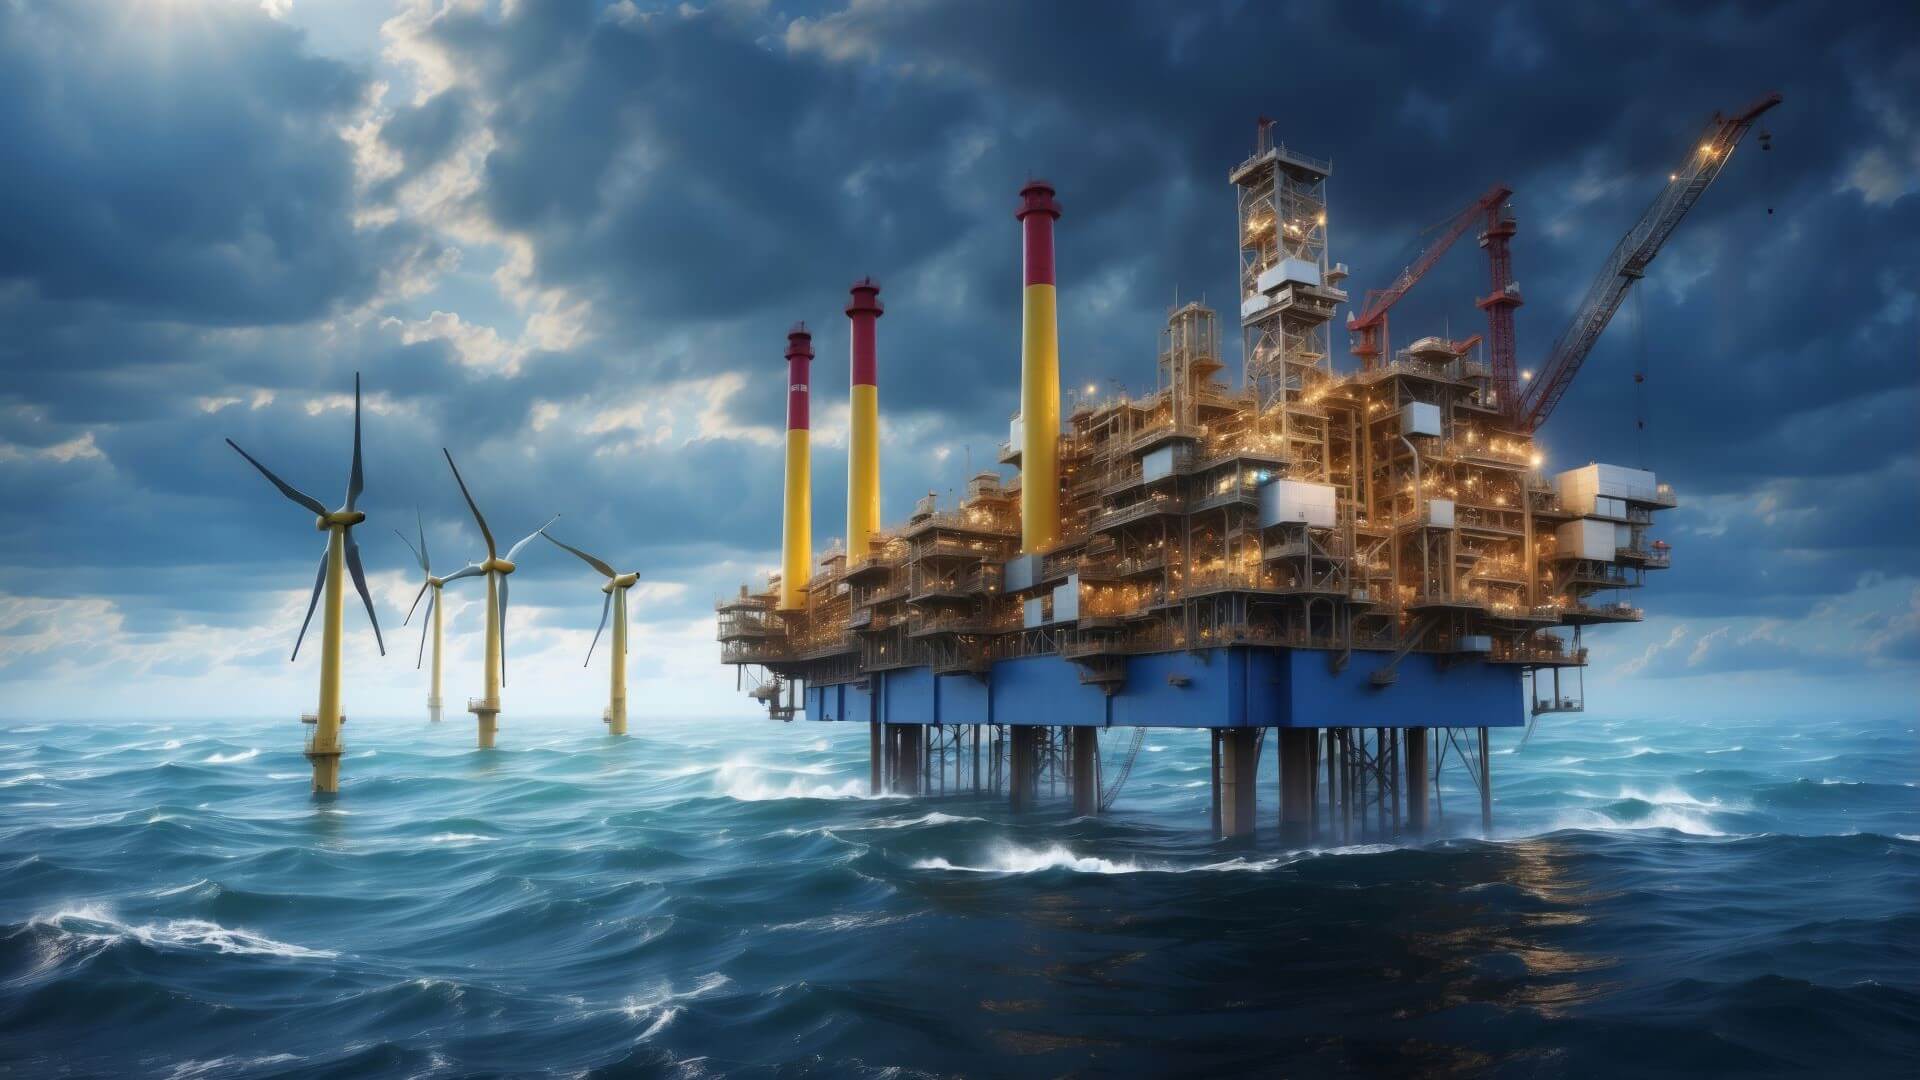 CGI rendering of an oil platform in choppy seas, with four wind turbines to the left